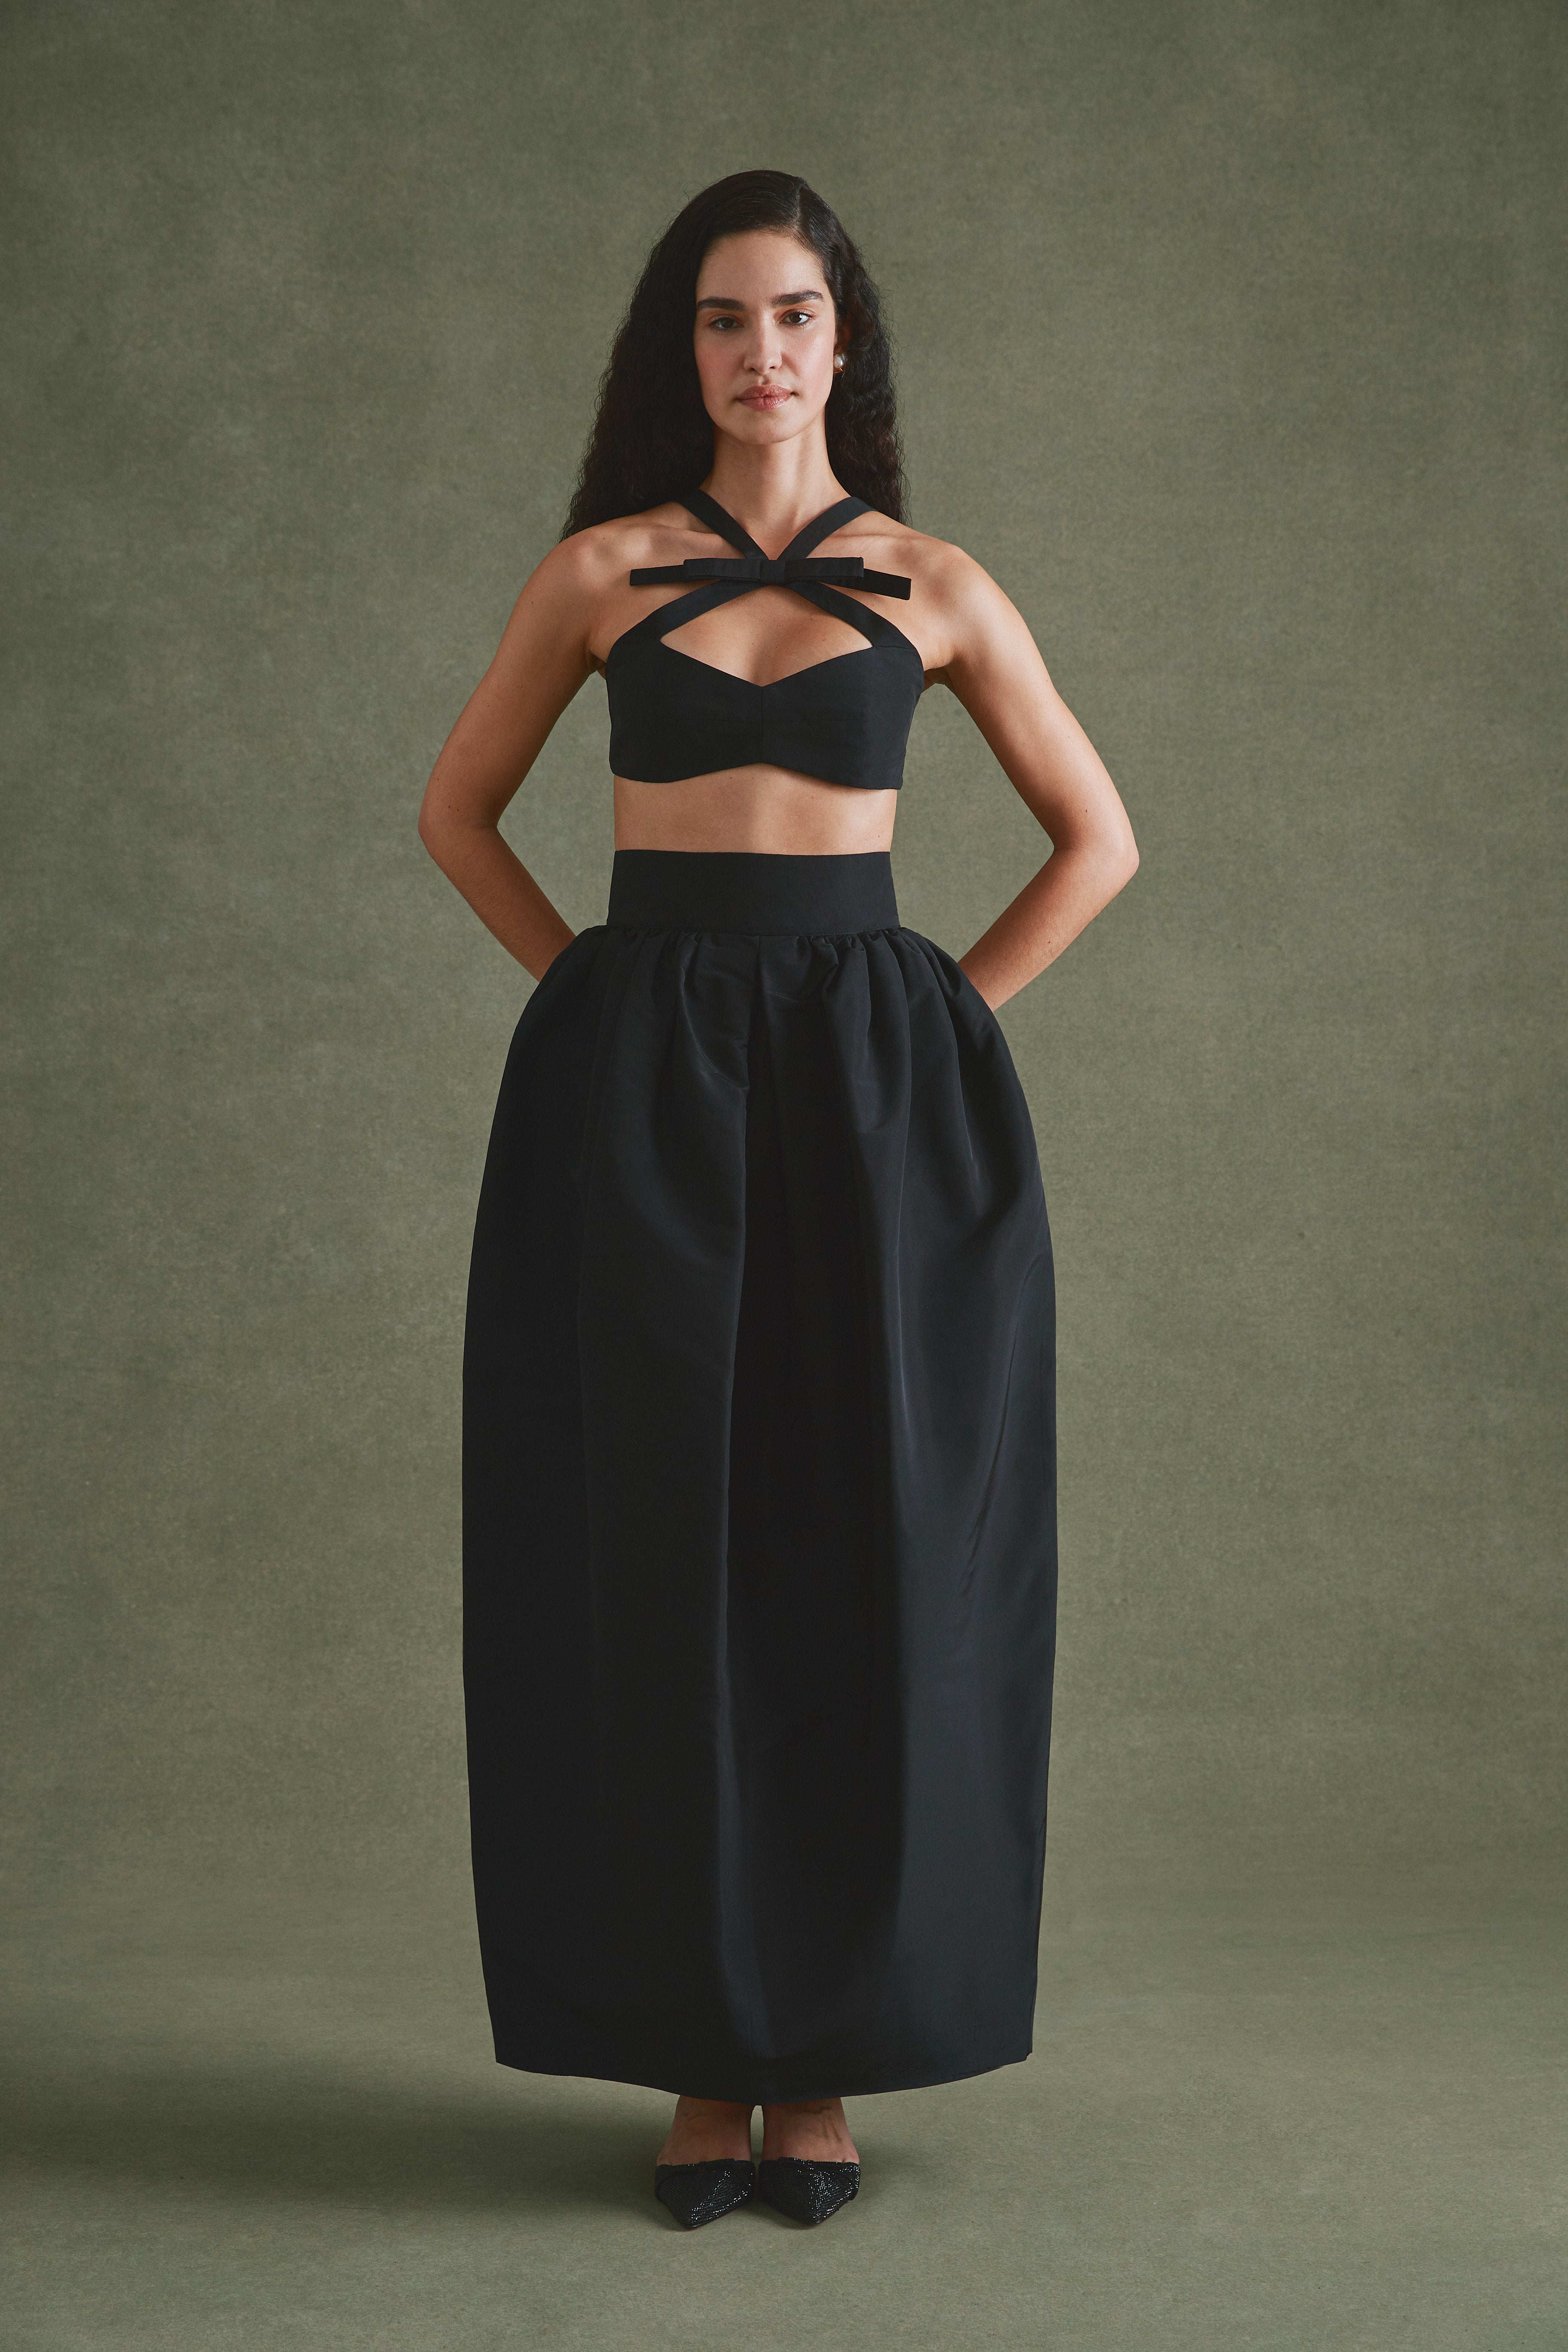 Alexandra Pijut Olivia Bow Set. Skirt and bra top with bow in silk falle. Wedding guest, black tie outfit.